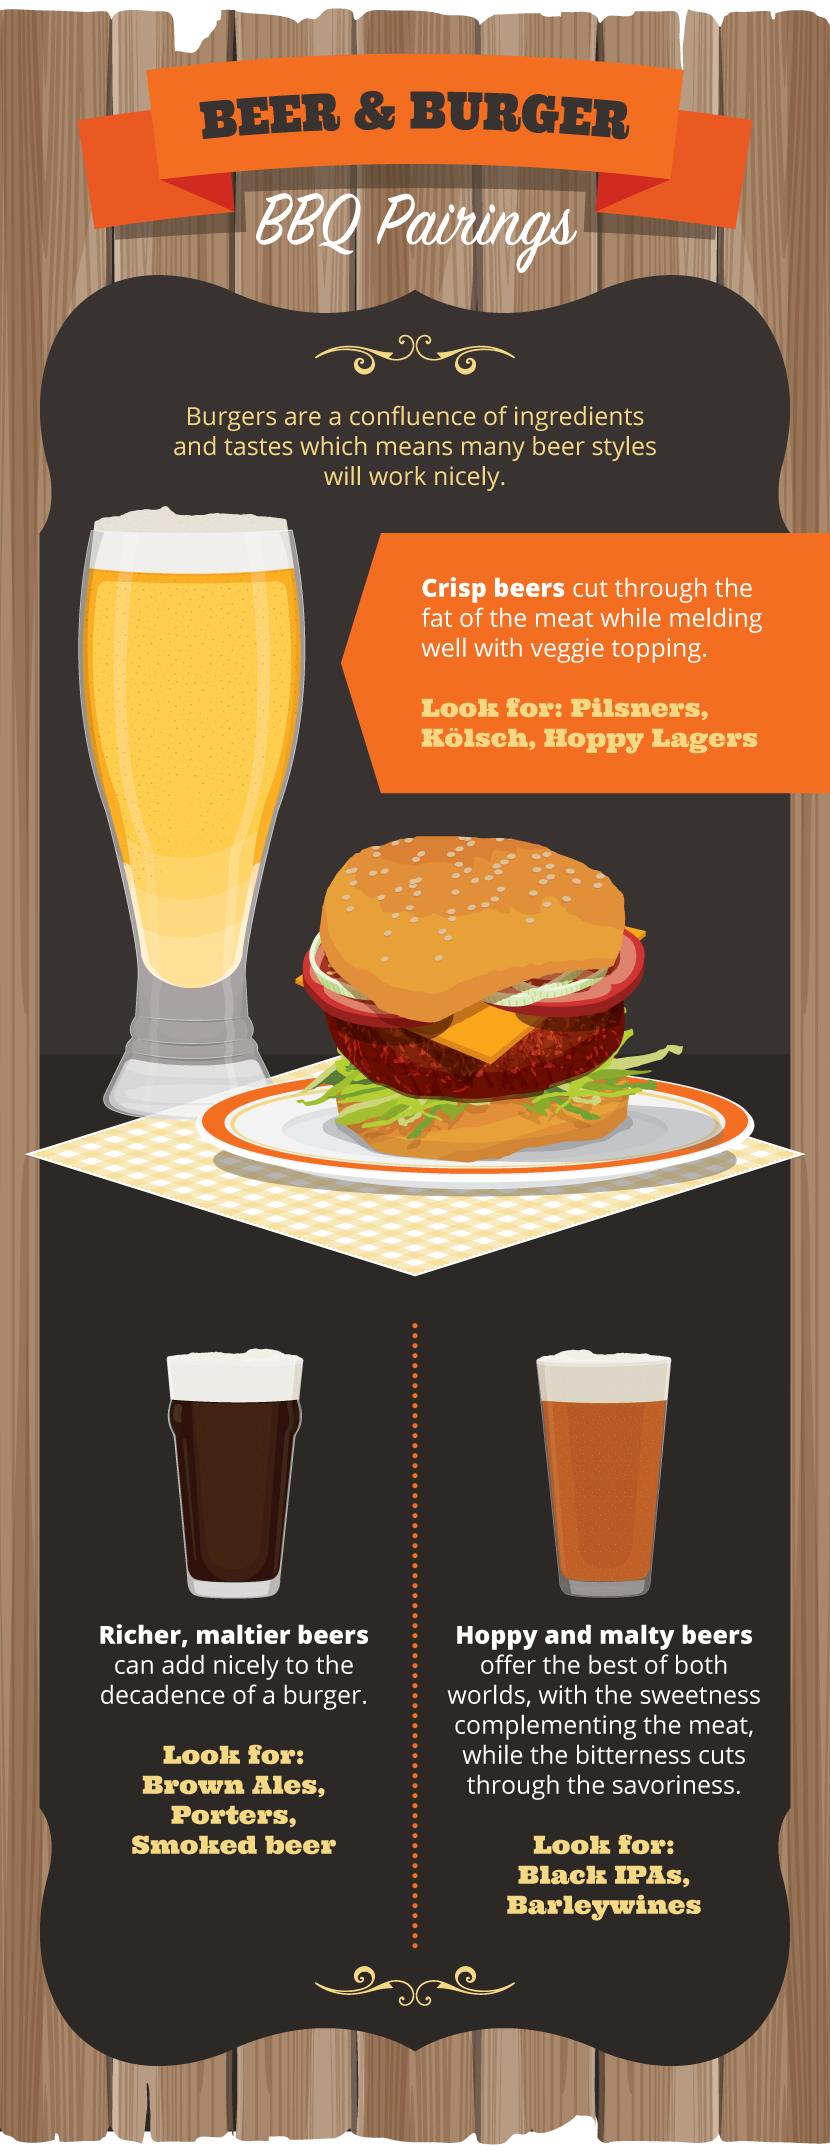 Craft Beer For Burgers - Craft Beer and BBQ Pairings